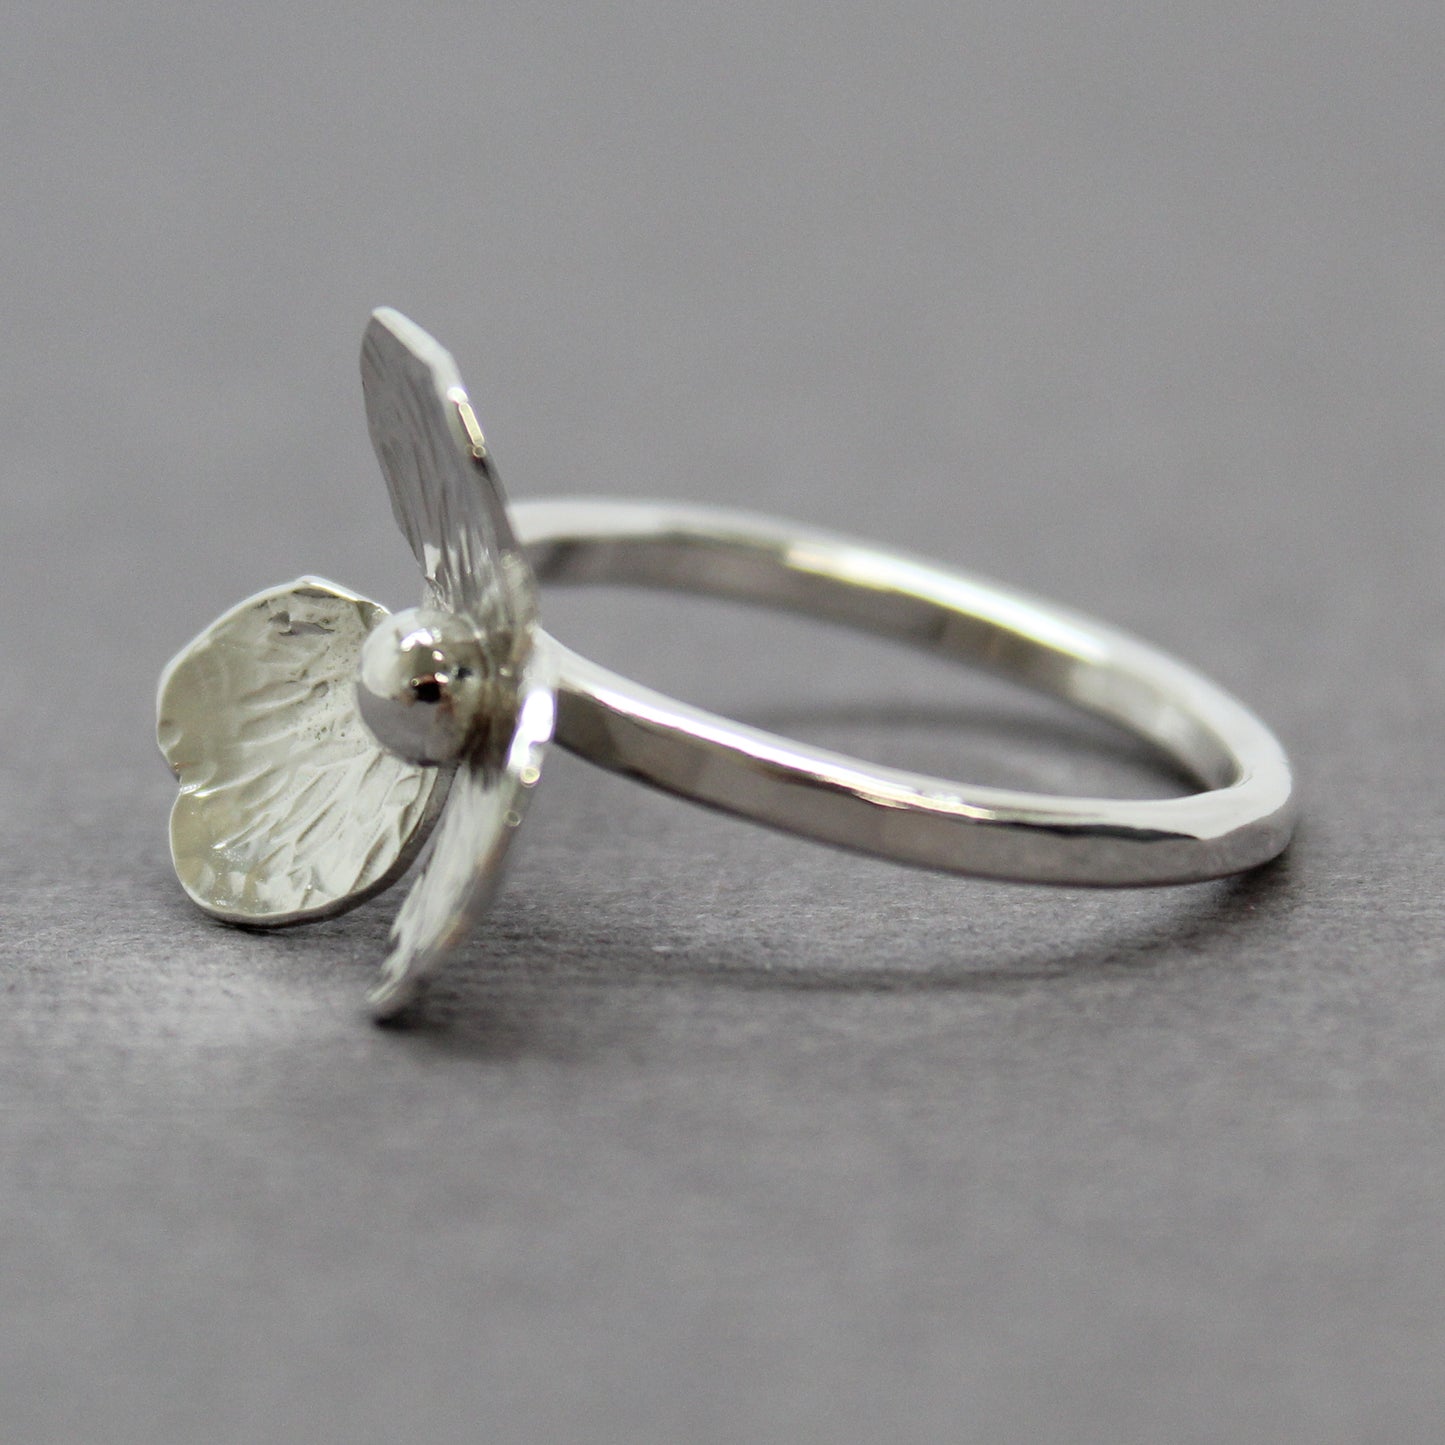 Sterling Silver Flower Ring Size 8.5 US